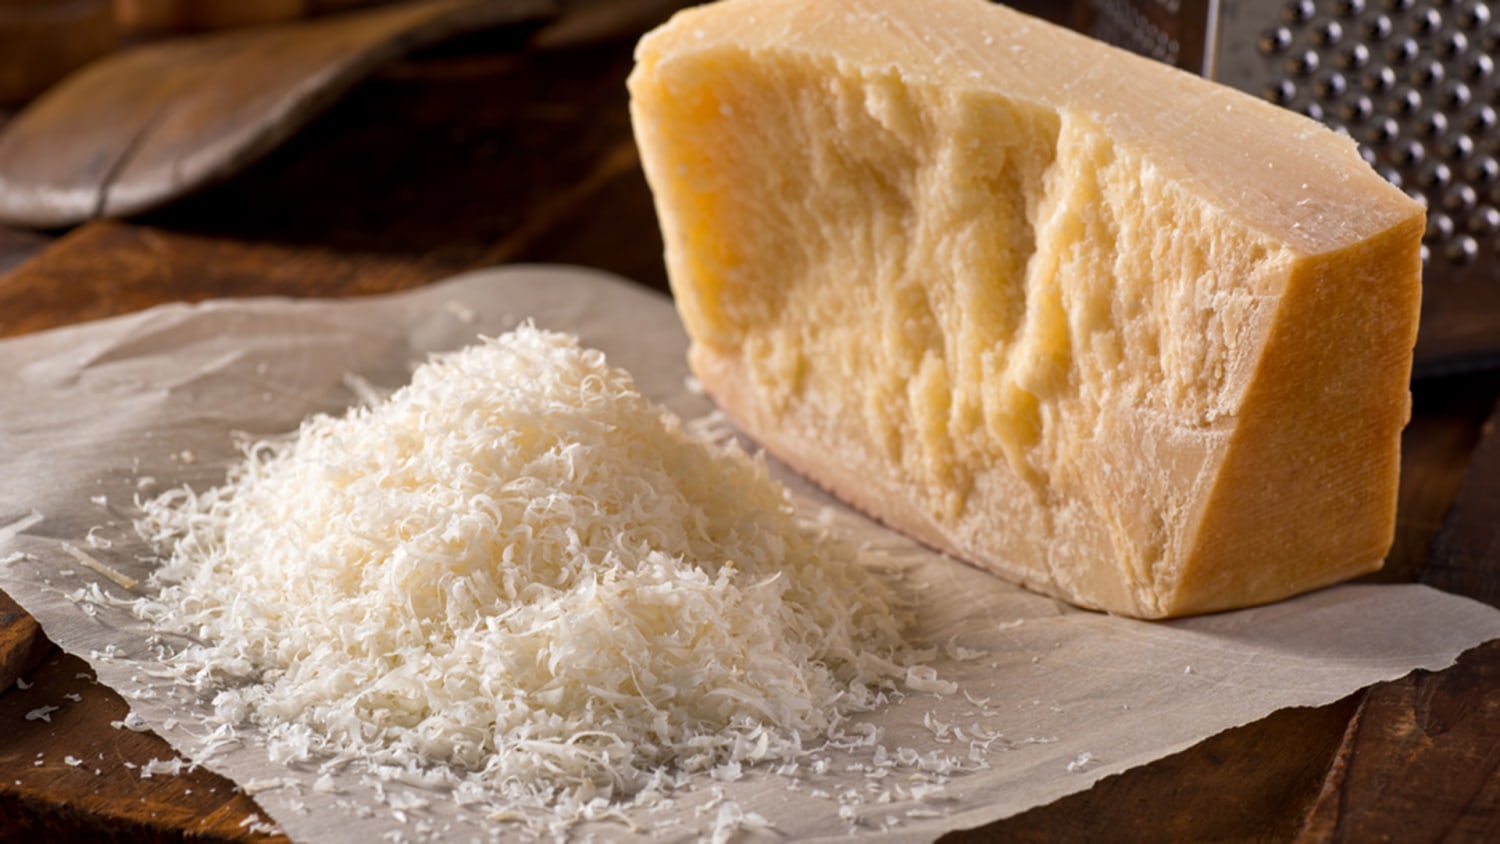 Fake Parmesan Cheese Is a Bigger Problem Than You'd Think - CNET